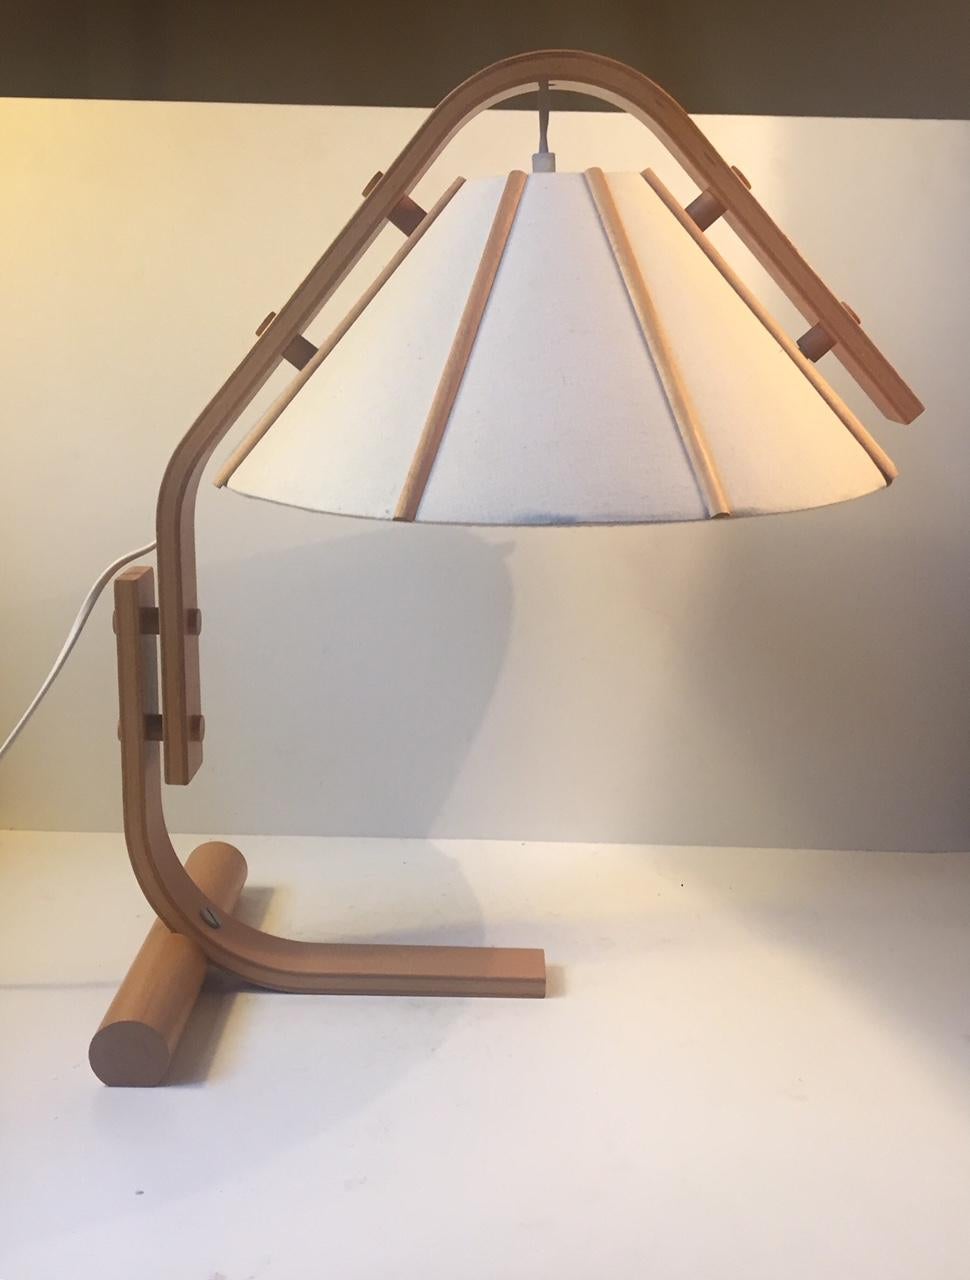 A Nordic modern styled table light made from bend wood beech and linen. Designed by Jan Wickelgren for Aneta in Sweden during the 1970s. The base is labeled with designer attribution and makers mark.